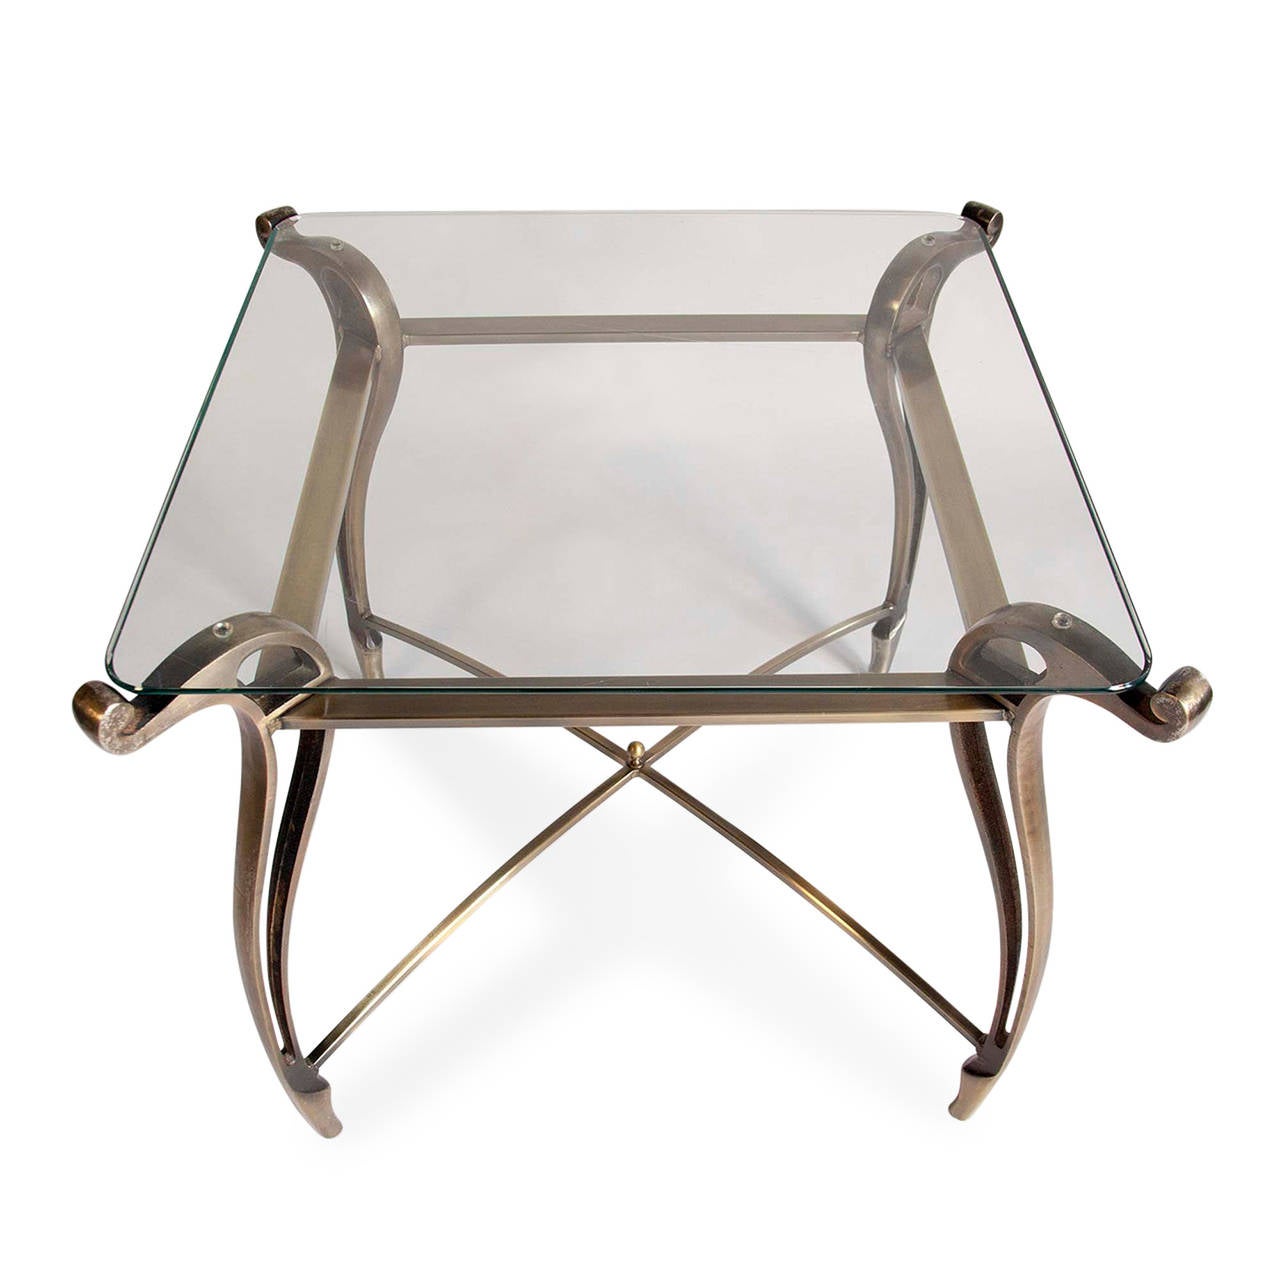 Bronze Occasional Table In Excellent Condition For Sale In Brooklyn, NY